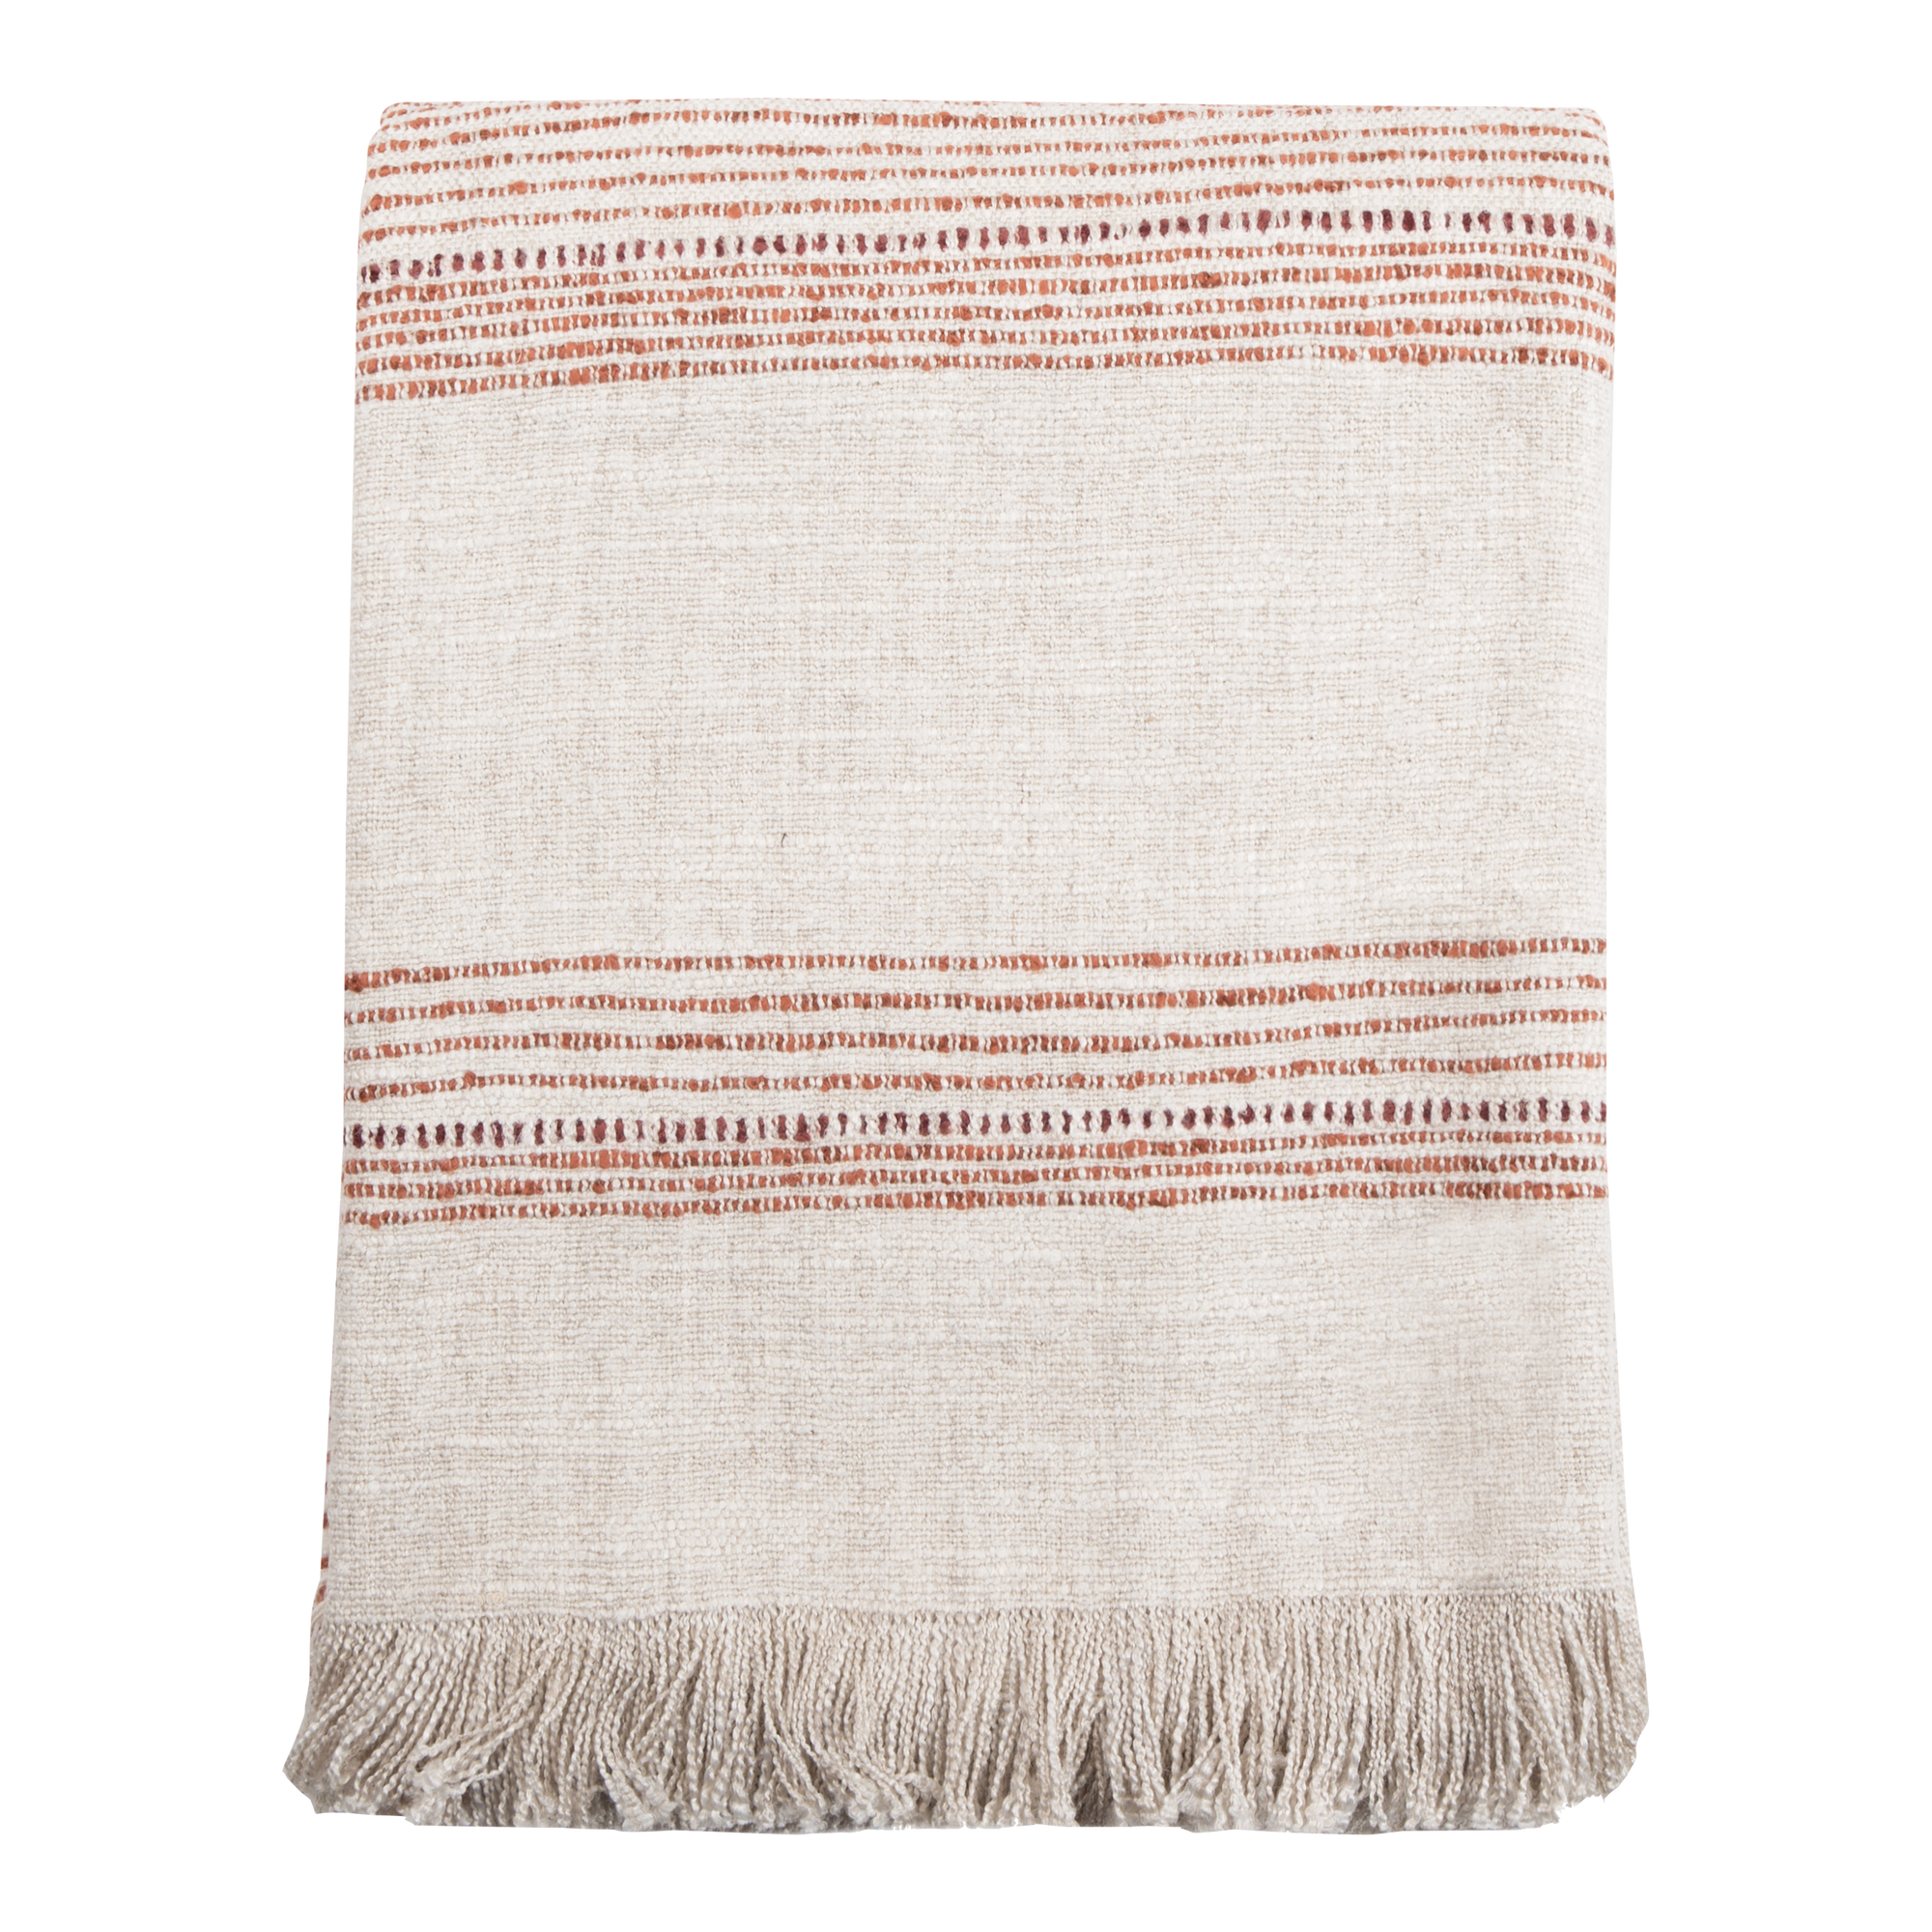 Woven in Belgium using traditional weaving techniques, the Woven Stripe Throw features an alternating Belgian Linen and mixed fiber weft to provide a natural yet captivating patter